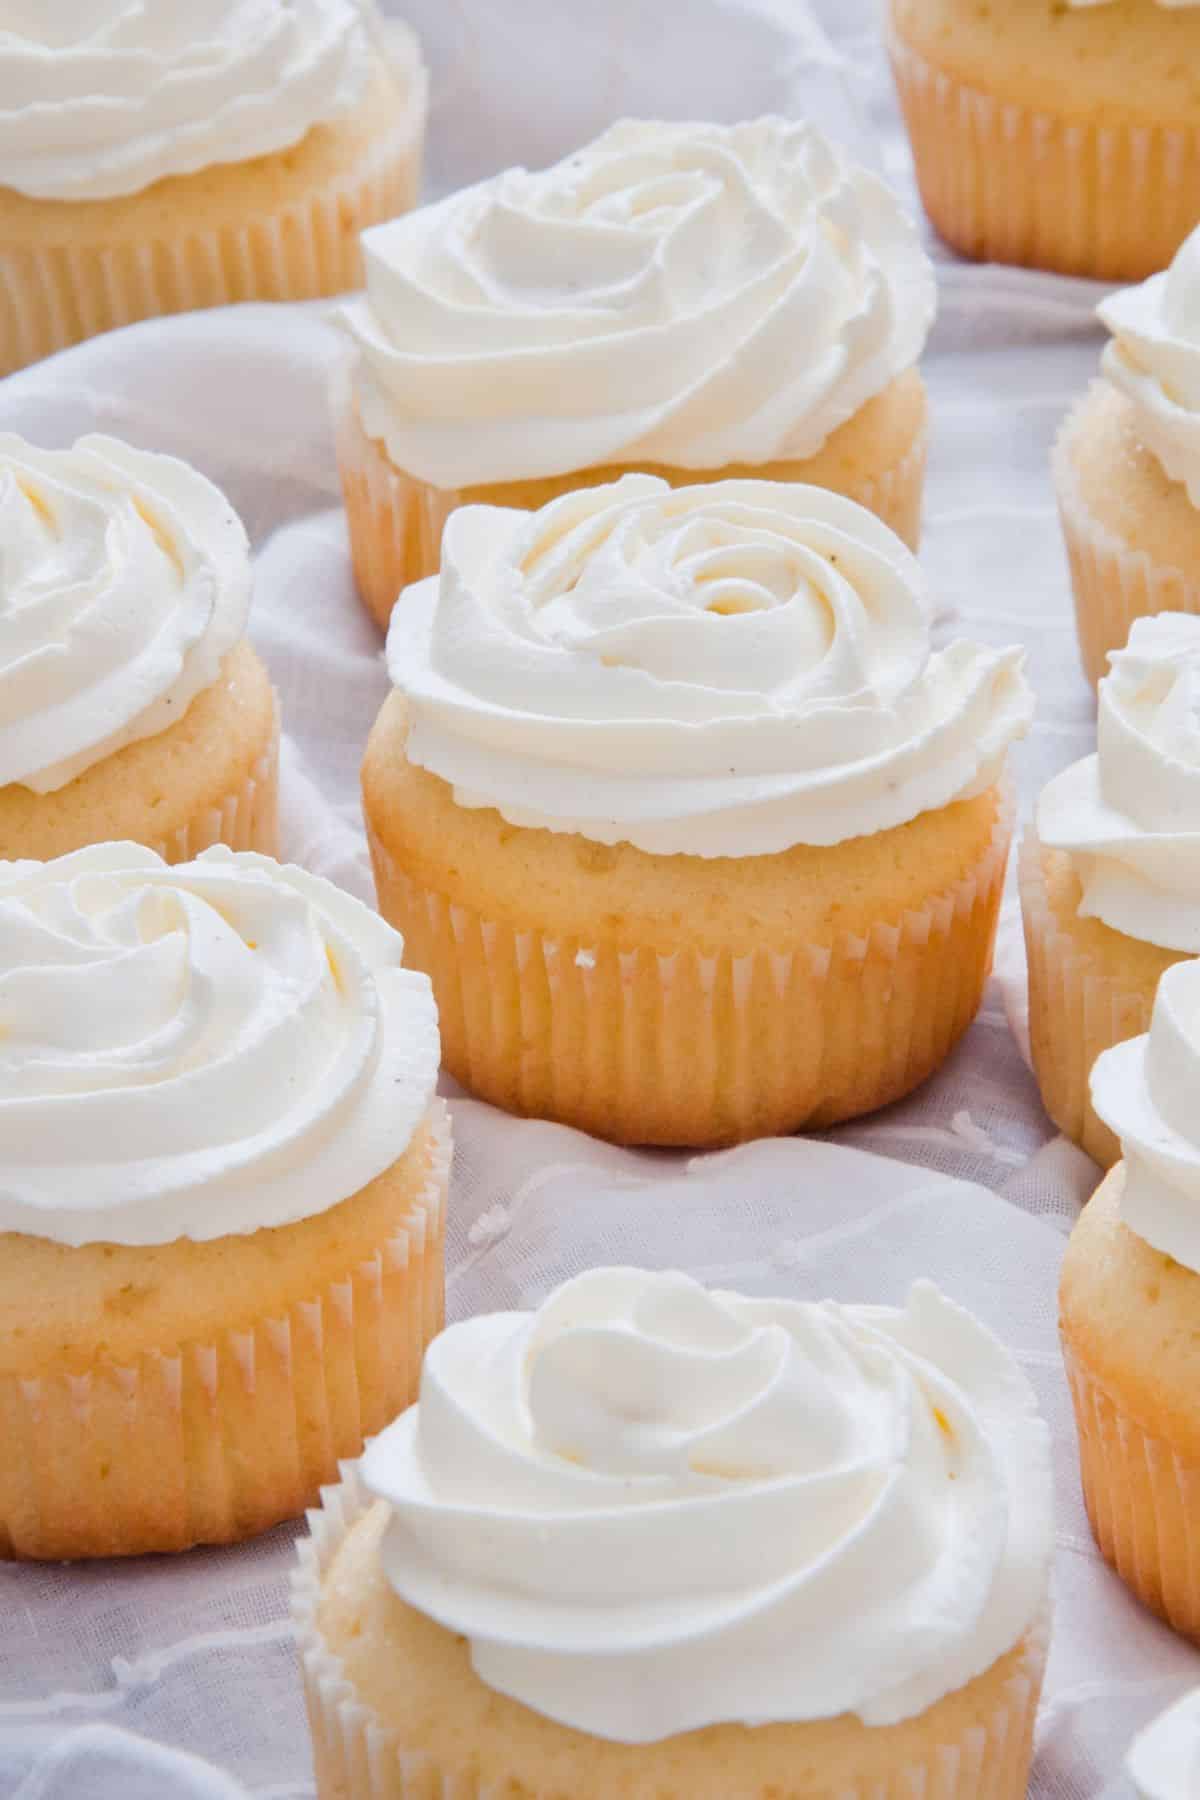 Vanilla gluten-free and dairy-free cupcakes topped with white frosting like a rose.